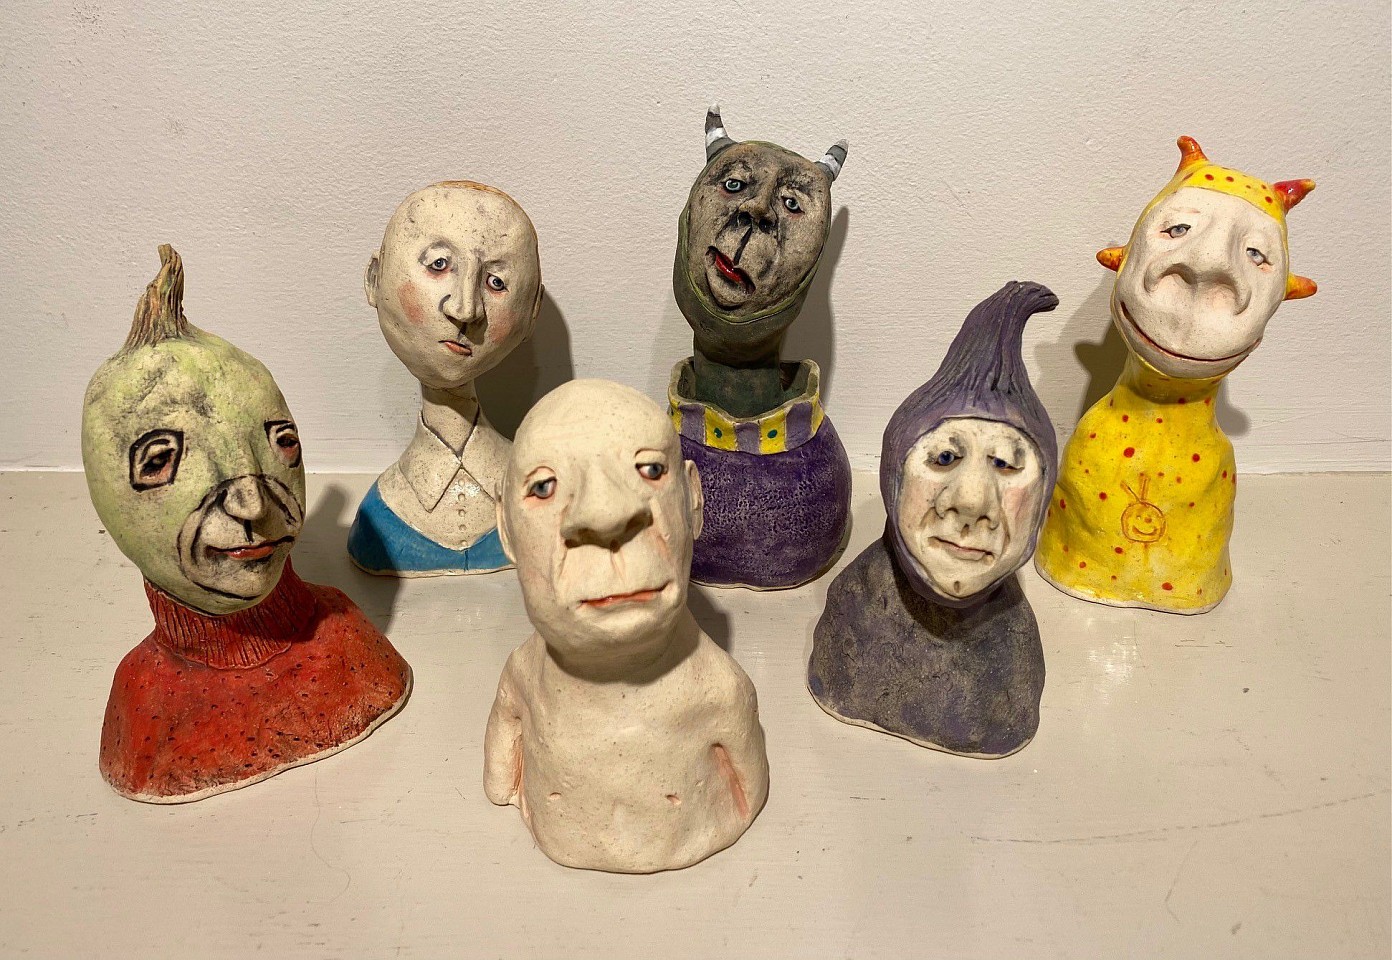 Jeanine Pennell, Characters Group 5
glazed ceramic, 4"" - 6""
JCAC 6292.05
$175